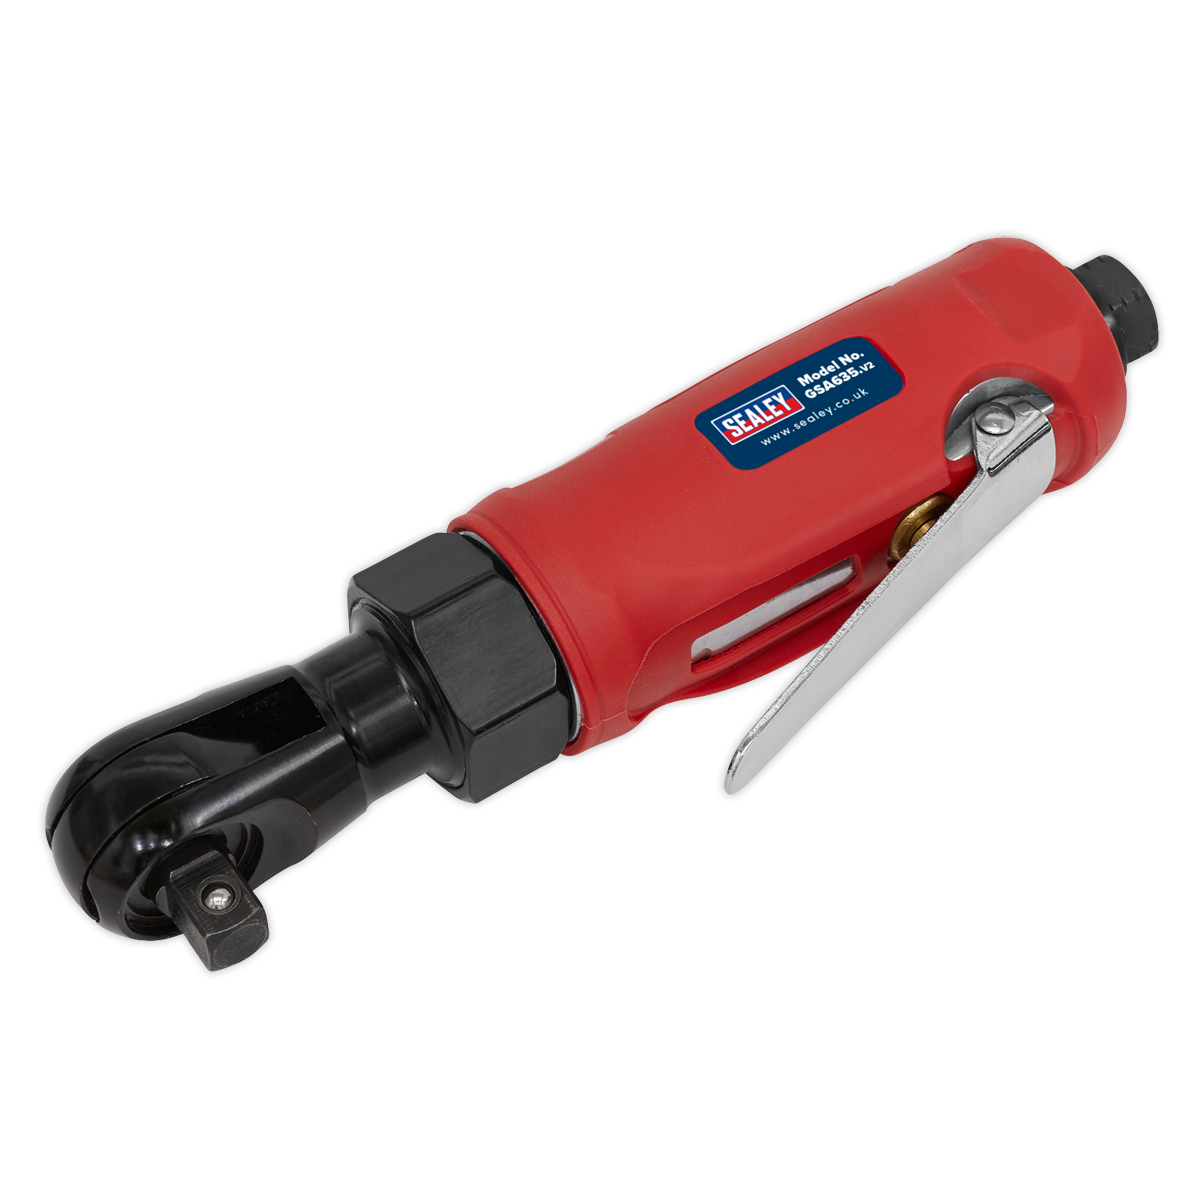 Compact Air Ratchet Wrench 3/8"Sq Drive